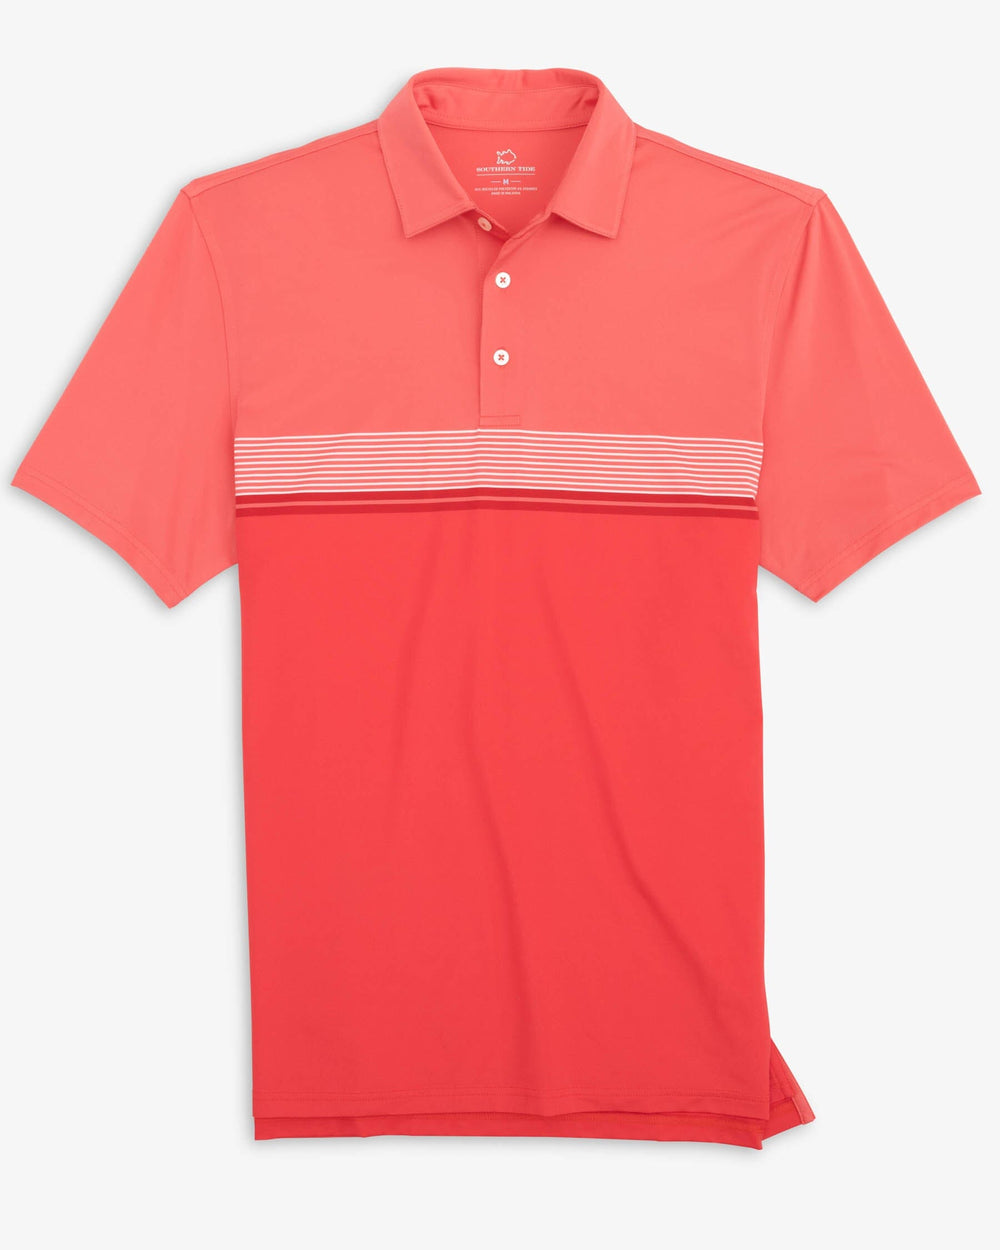 The front view of the Southern Tide Driver Wildwood Stripe Polo Shirt by Southern Tide - Rosewood Red